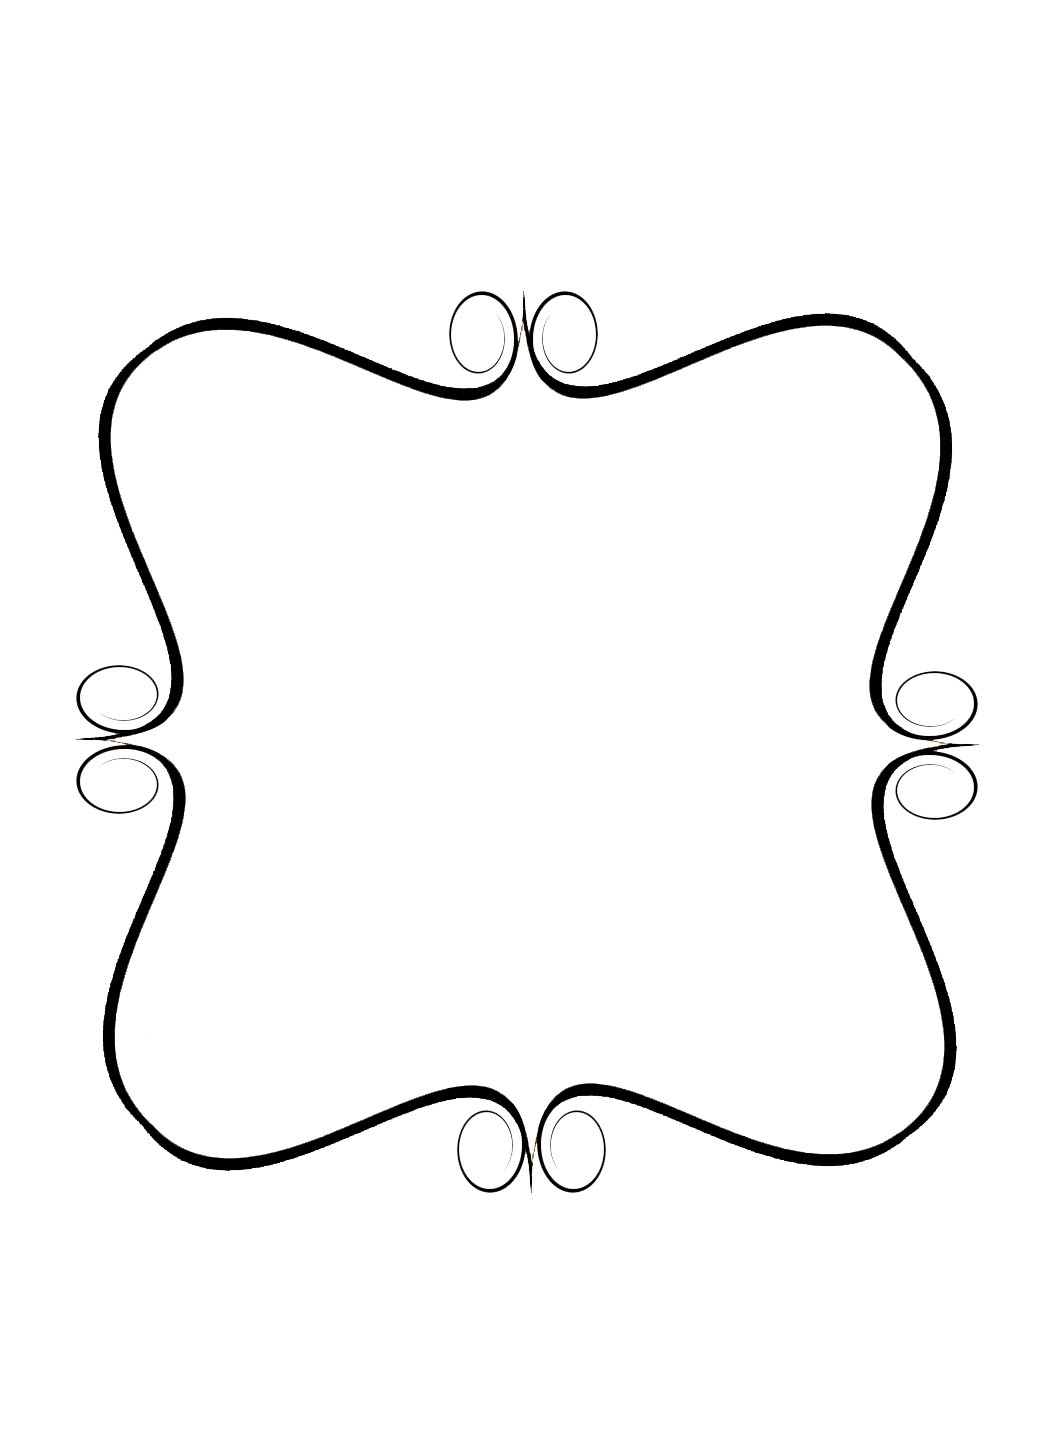 Squiggly lines clip art